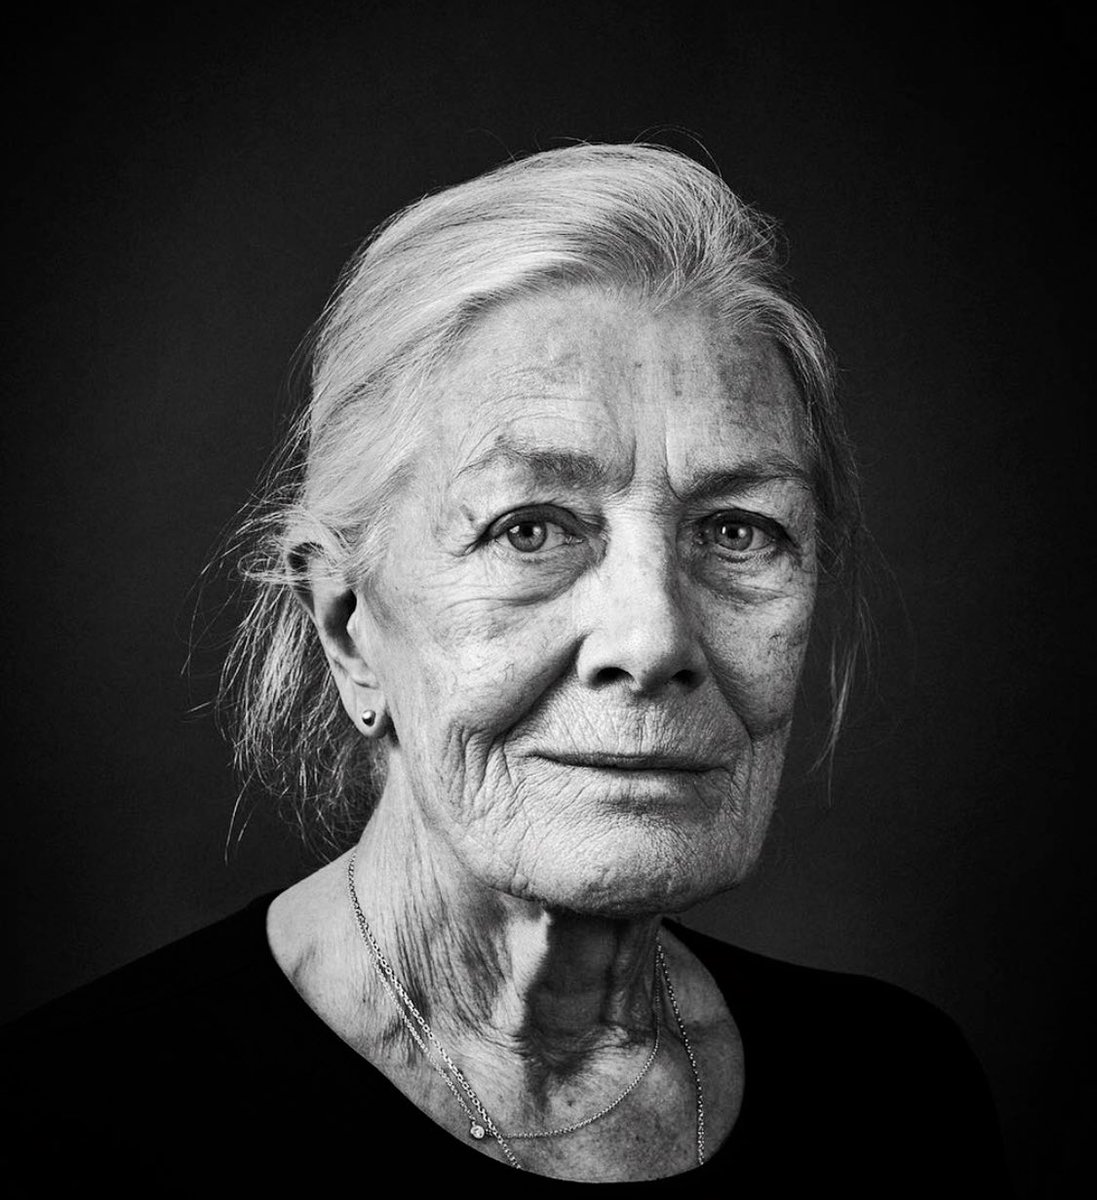 “I've still got to do something to help, however tiny it is. I always think of the old Hebrew saying, which is translated roughly into, 'He who saves one life saves the world,' because it's pretty ghastly to think of all the people we're not saving.”
#VanessaRedgrave birthday